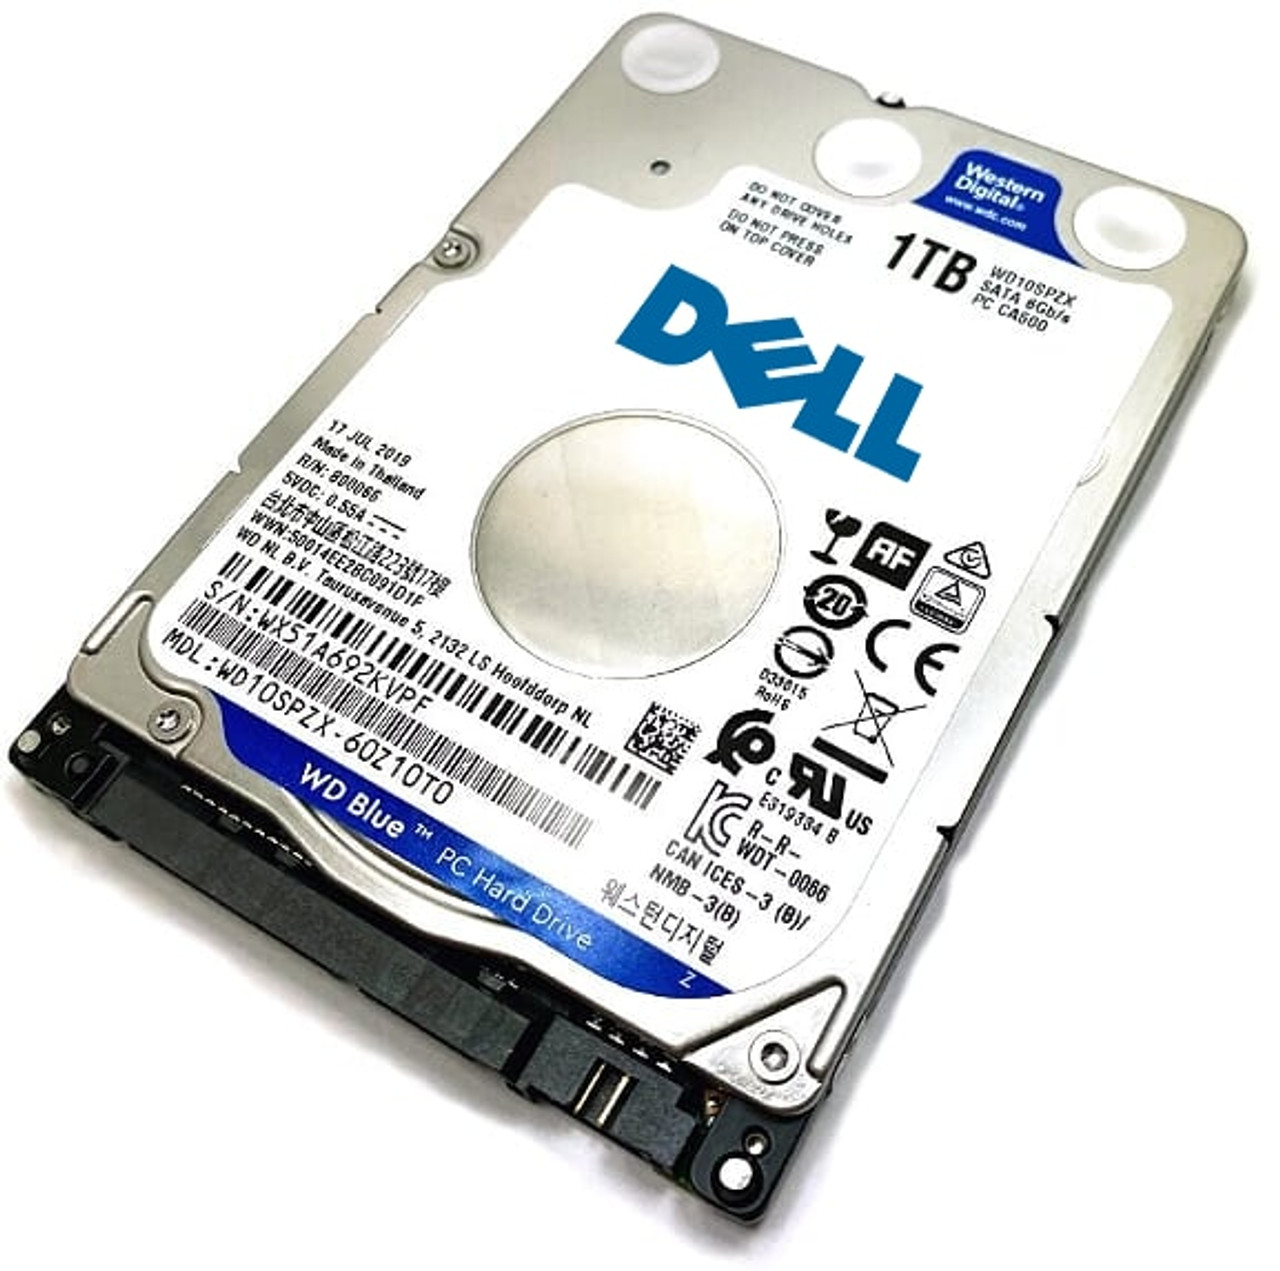 Dell Inspiron 15 7000 Series P26E Laptop Hard Drive Replacement -  